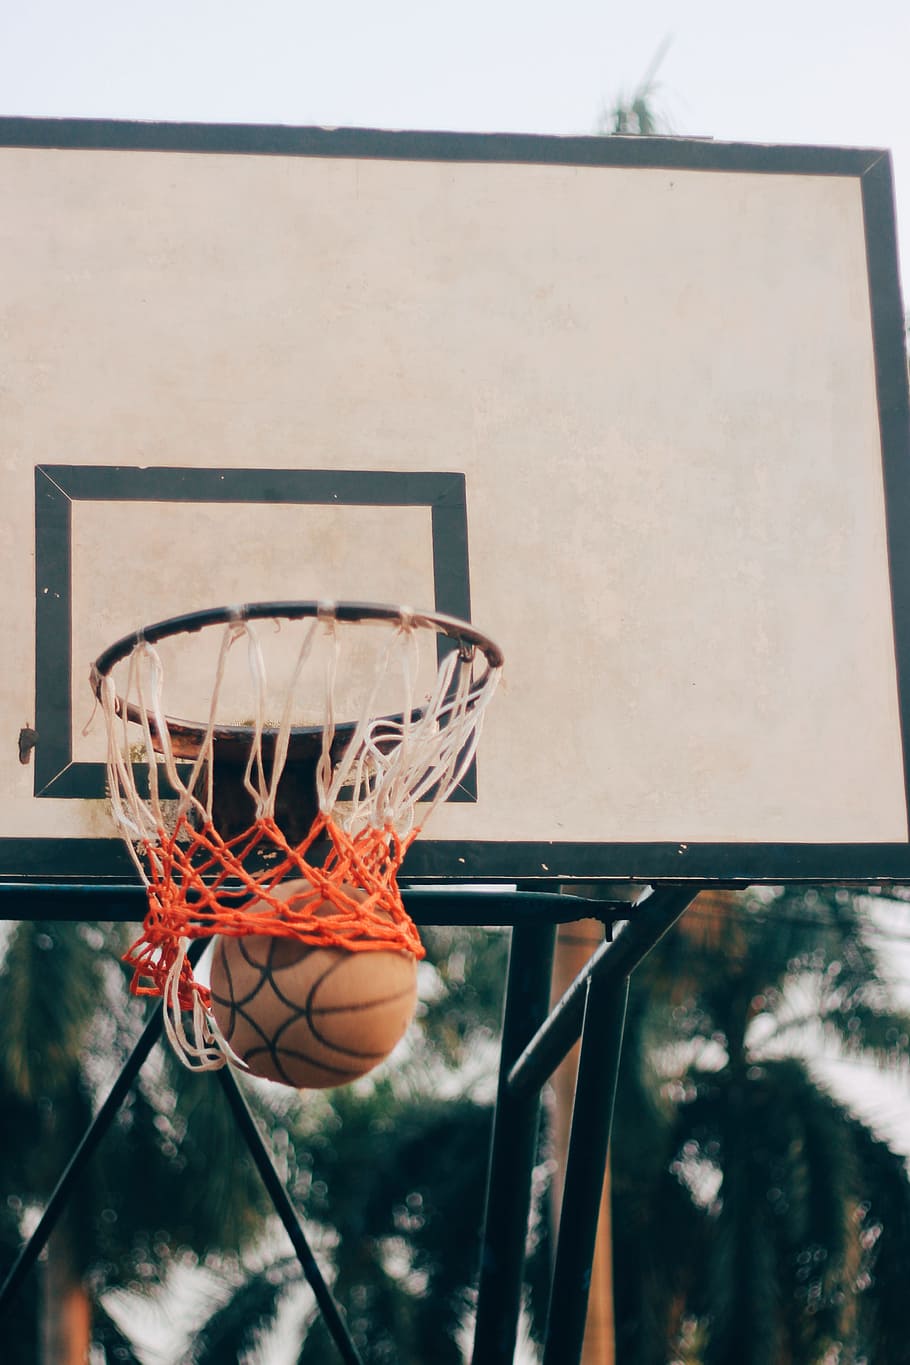 close-up photo of basketball rim during daytime, outdoors, street